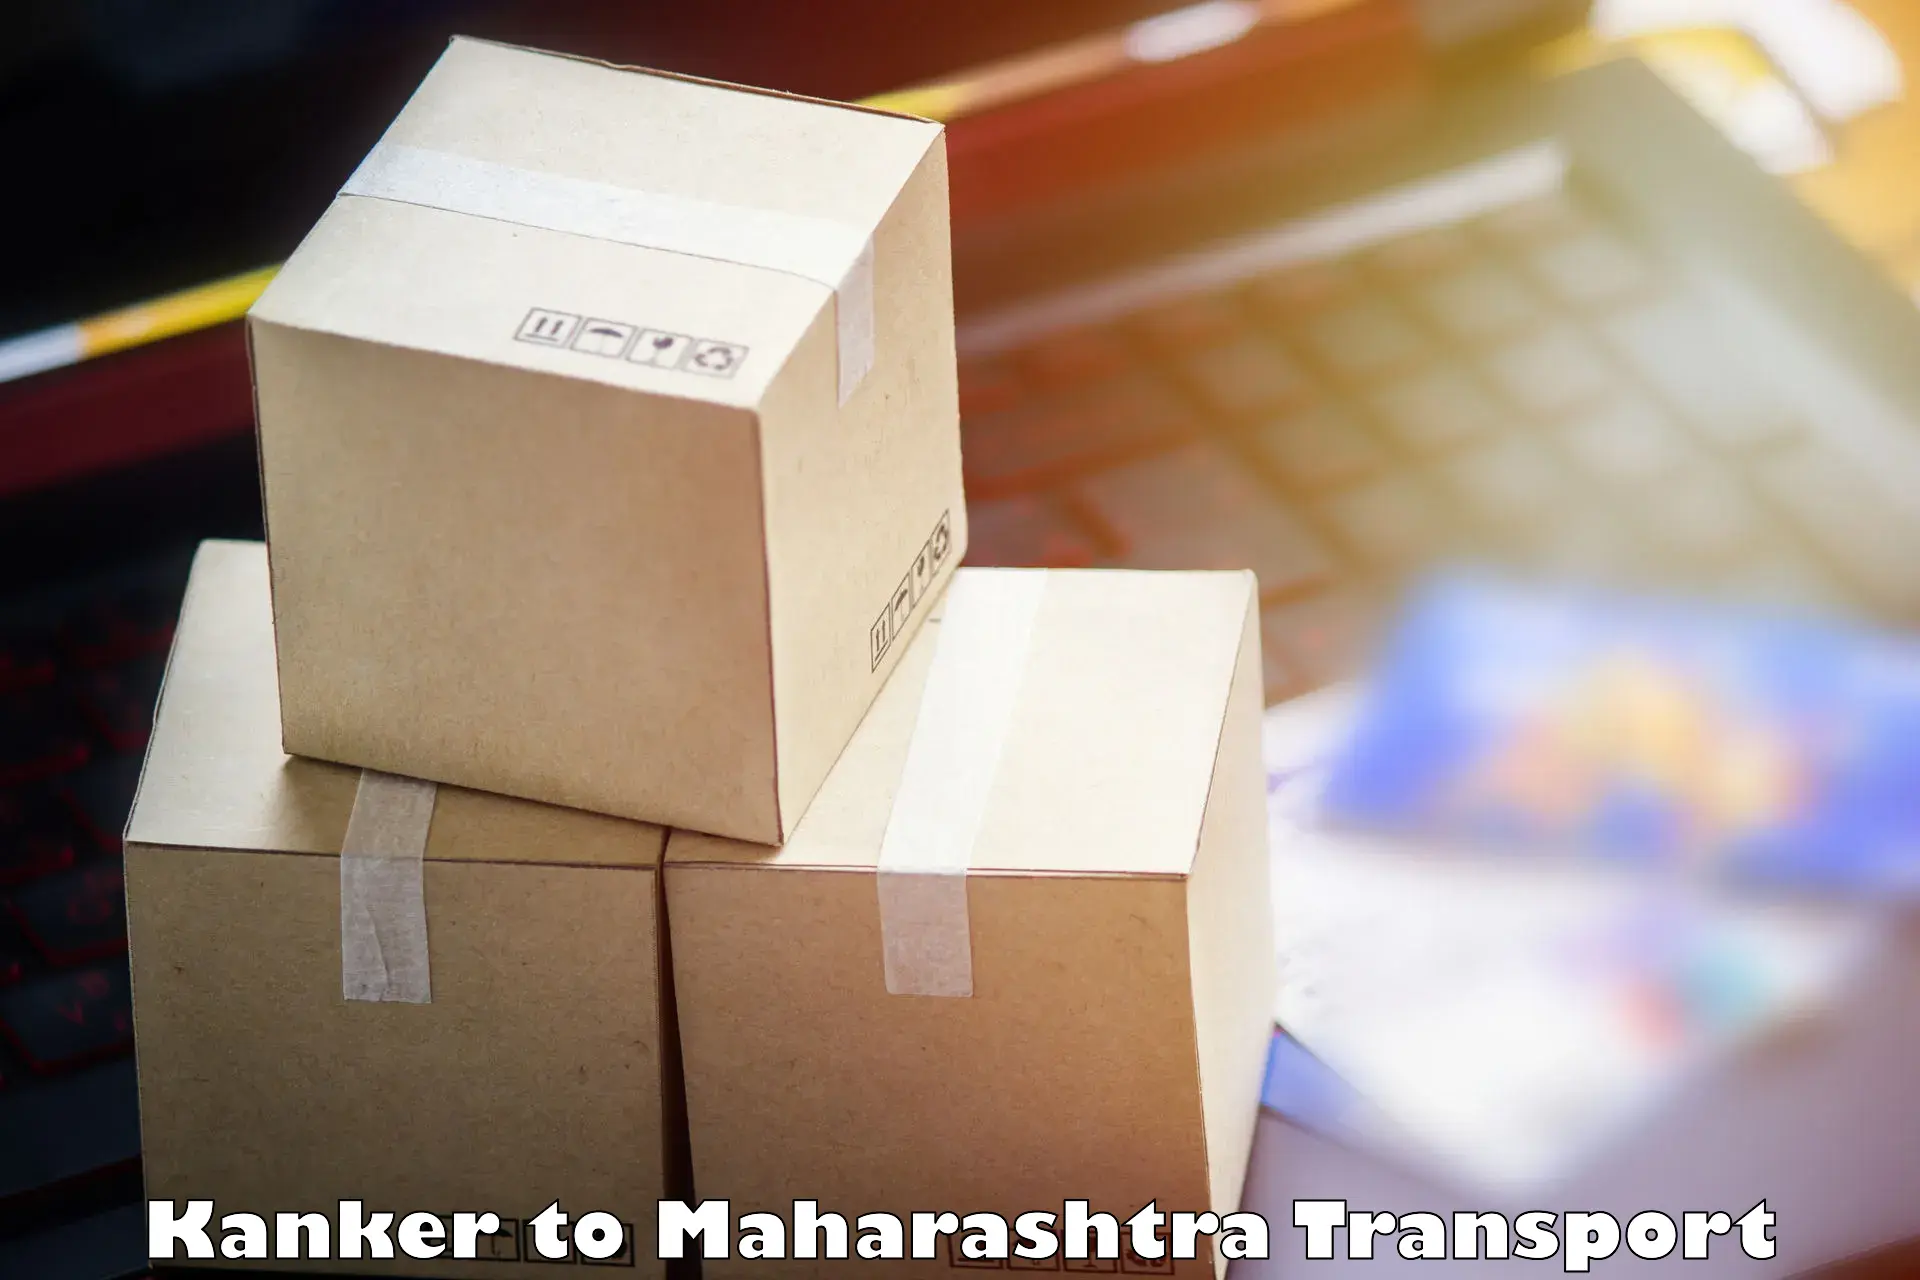 Truck transport companies in India Kanker to Aheri